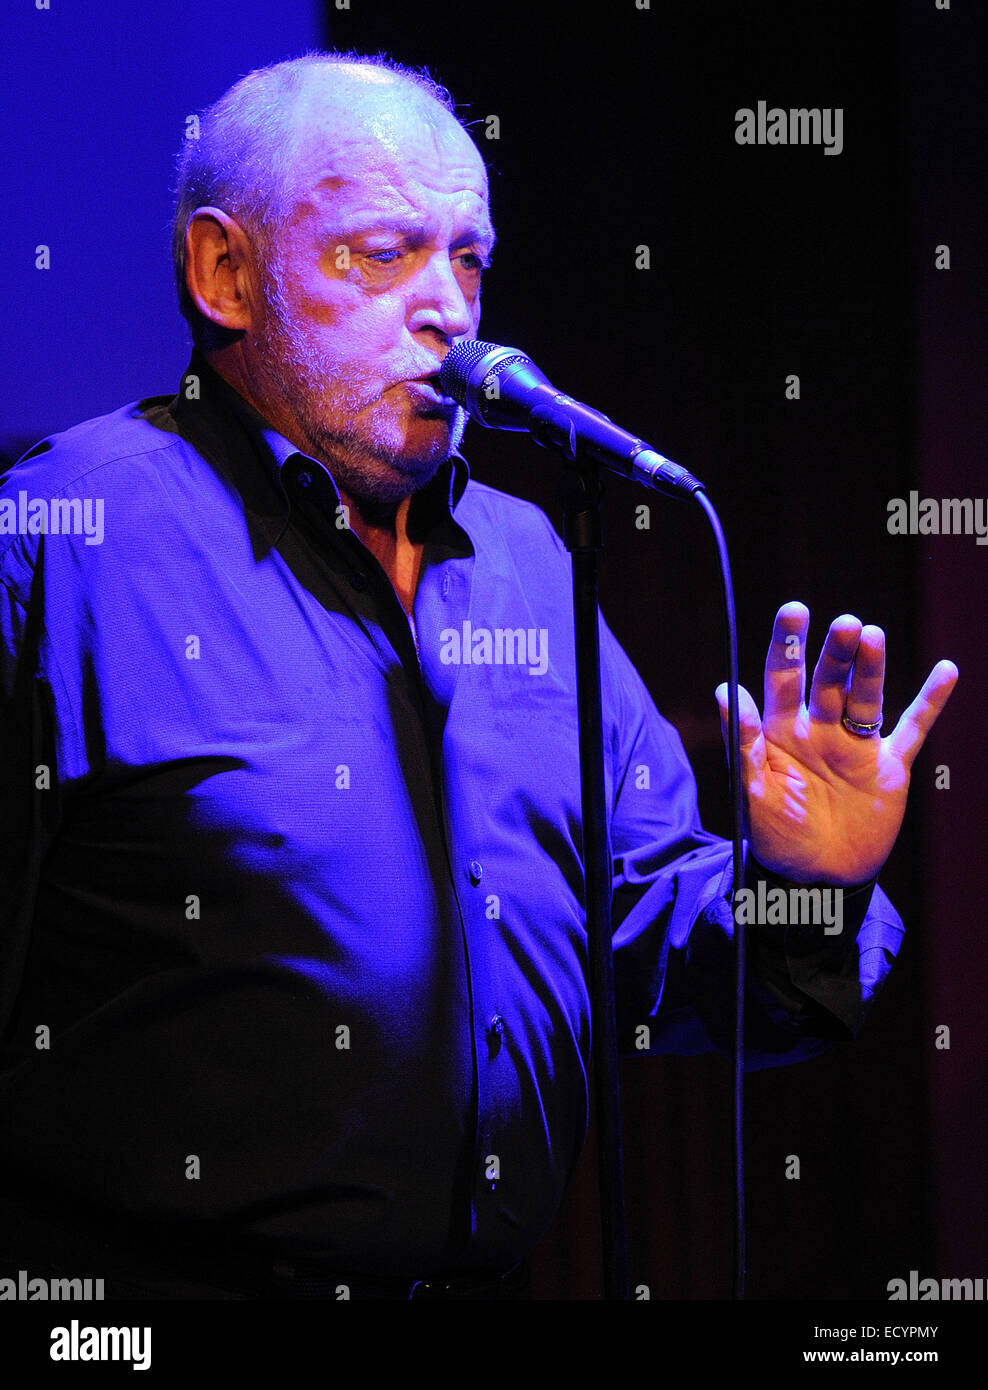 Cologne, Germany. 18th Nov, 2012. British singer Joe Cocker performs during a concert for the German public broadcaster WDR2 in Cologne, Germany, 18 November 2012. Photo: Henning Kaiser/dpa/Alamy Live News Stock Photo